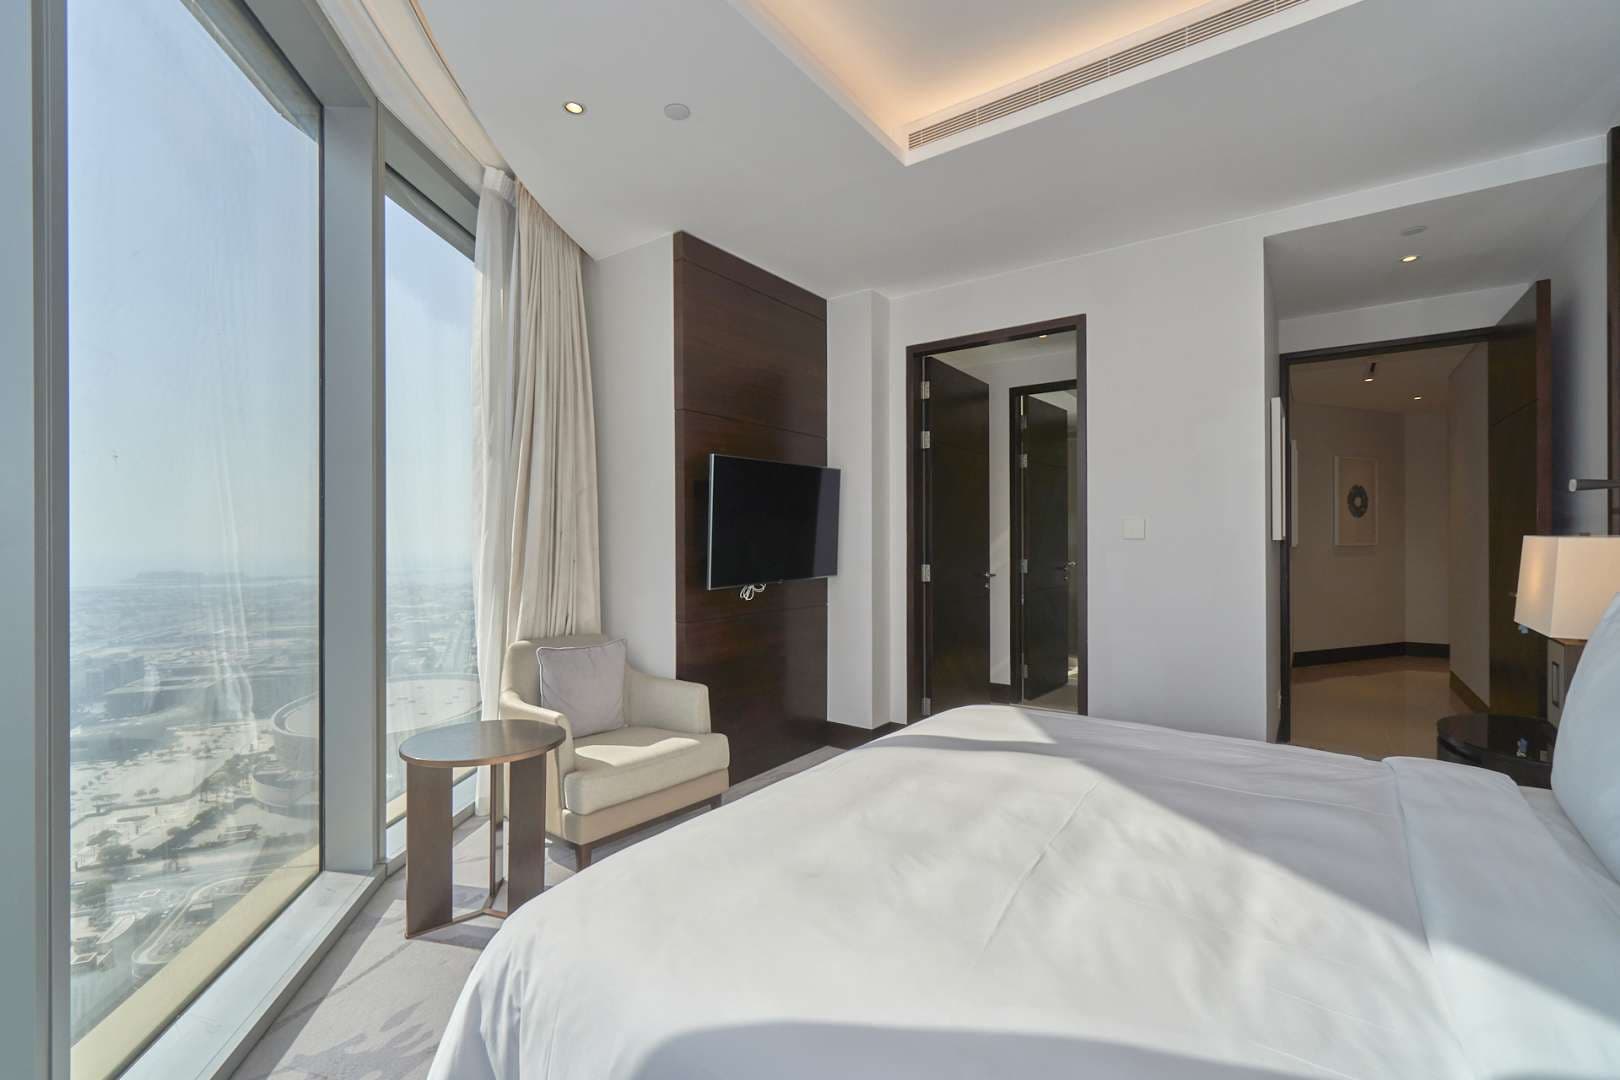 3 Bedroom Apartment For Sale The Address Sky View Towers Lp09314 7d7a816c881a98.jpg